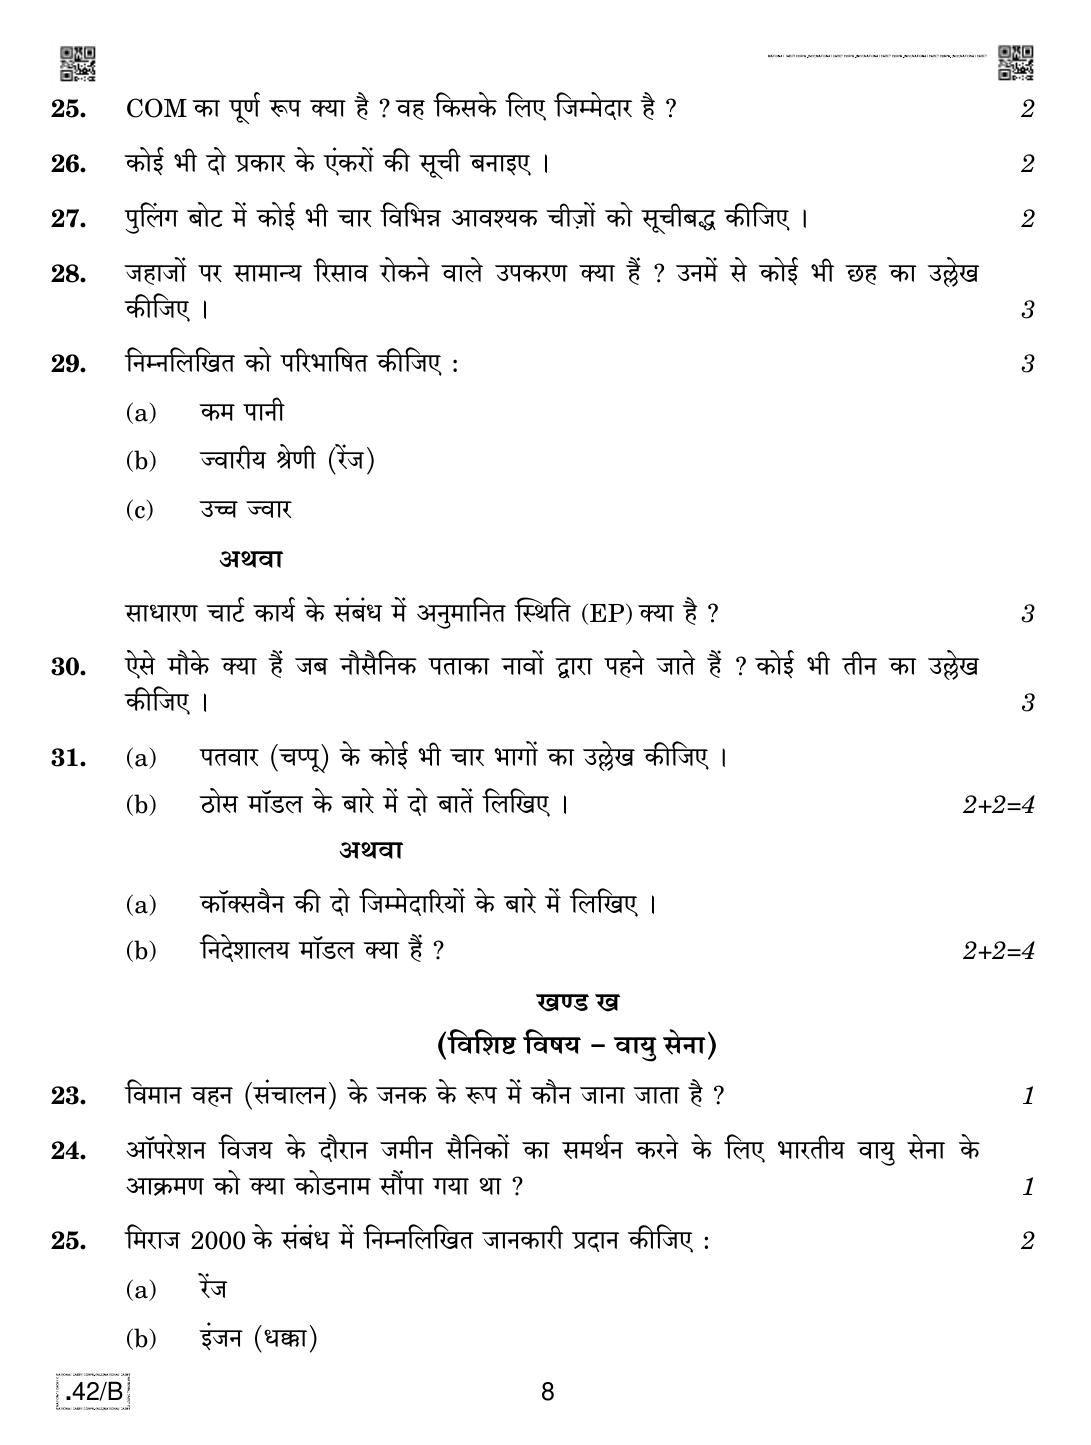 CBSE Class 12 NCC 2020 Compartment Question Paper - Page 8